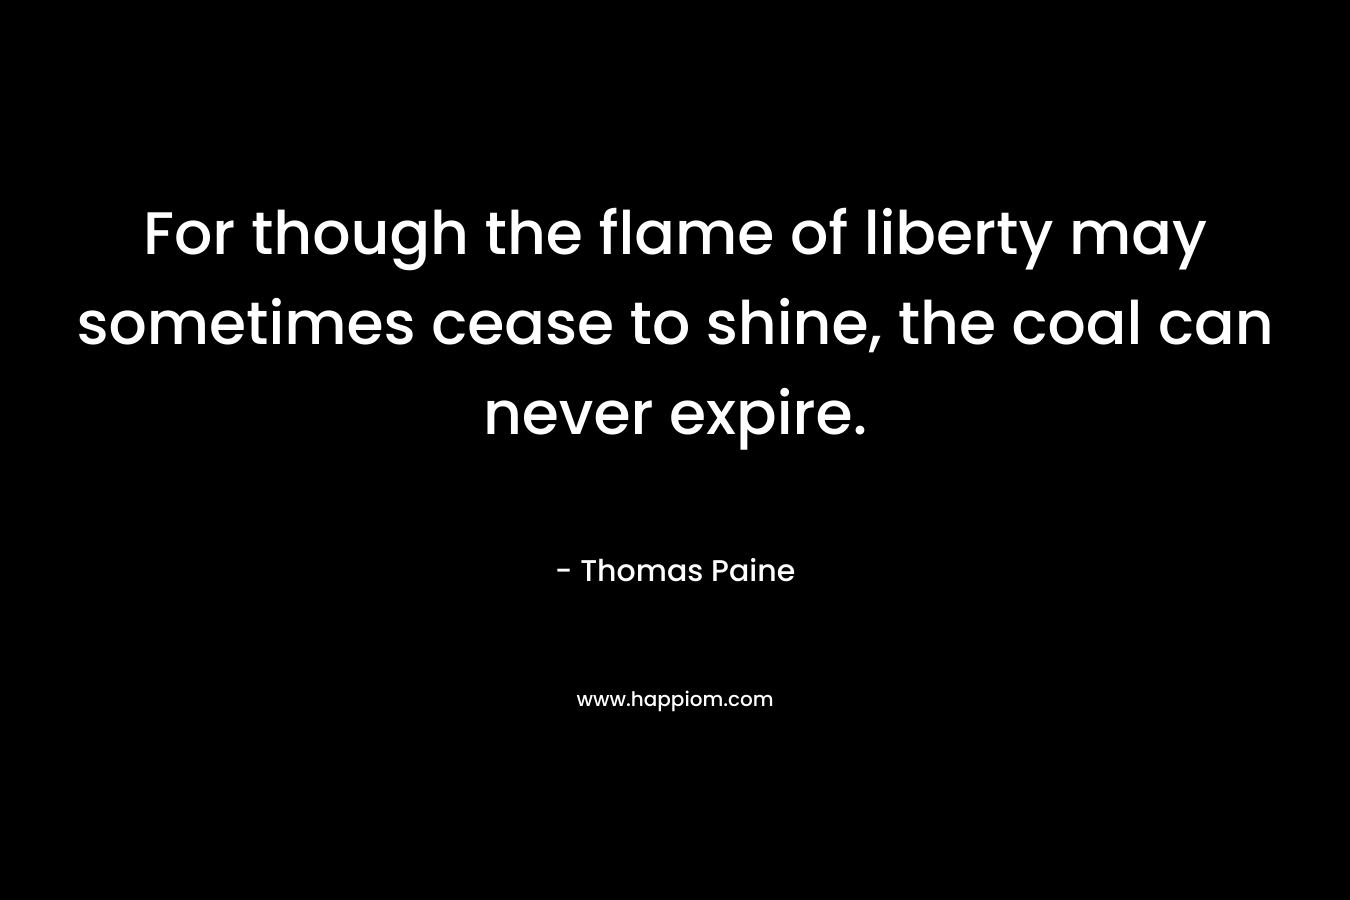 For though the flame of liberty may sometimes cease to shine, the coal can never expire. – Thomas Paine